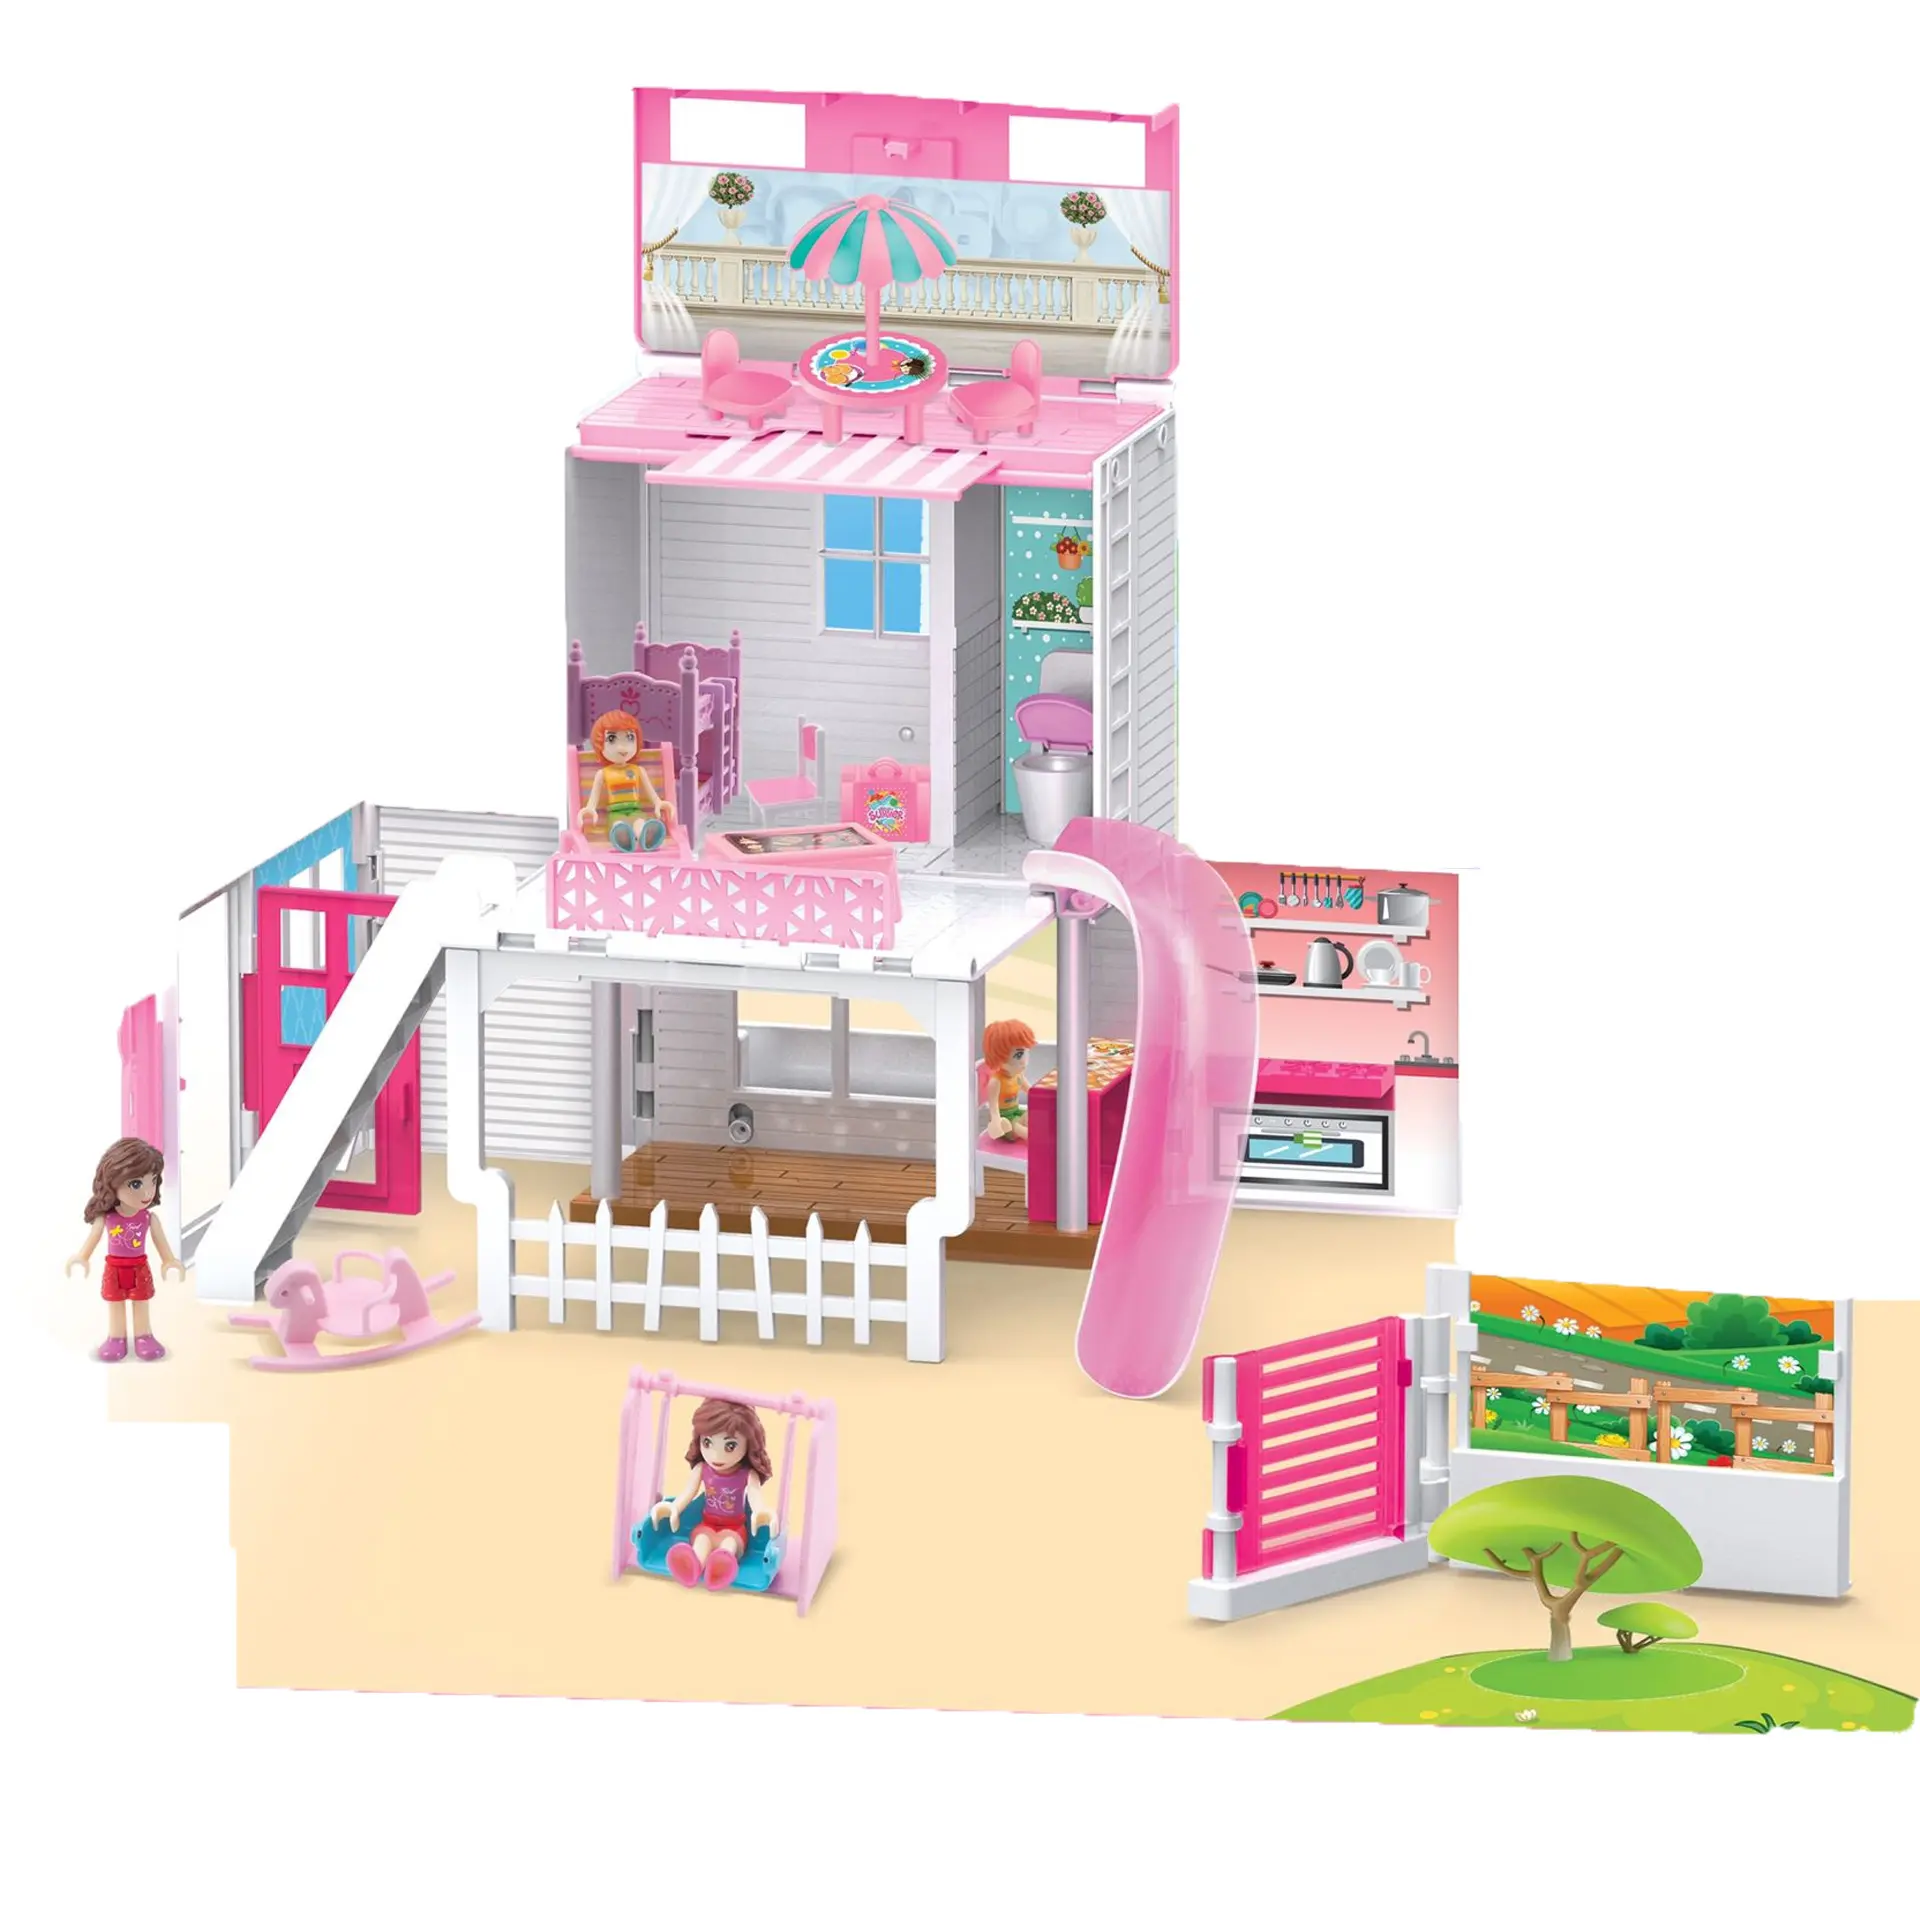 High Quality Plastic Diy Villa With Beach Tables and Chairs Set Mini Doll In Villa Toy With Swing Storage Villa For girl